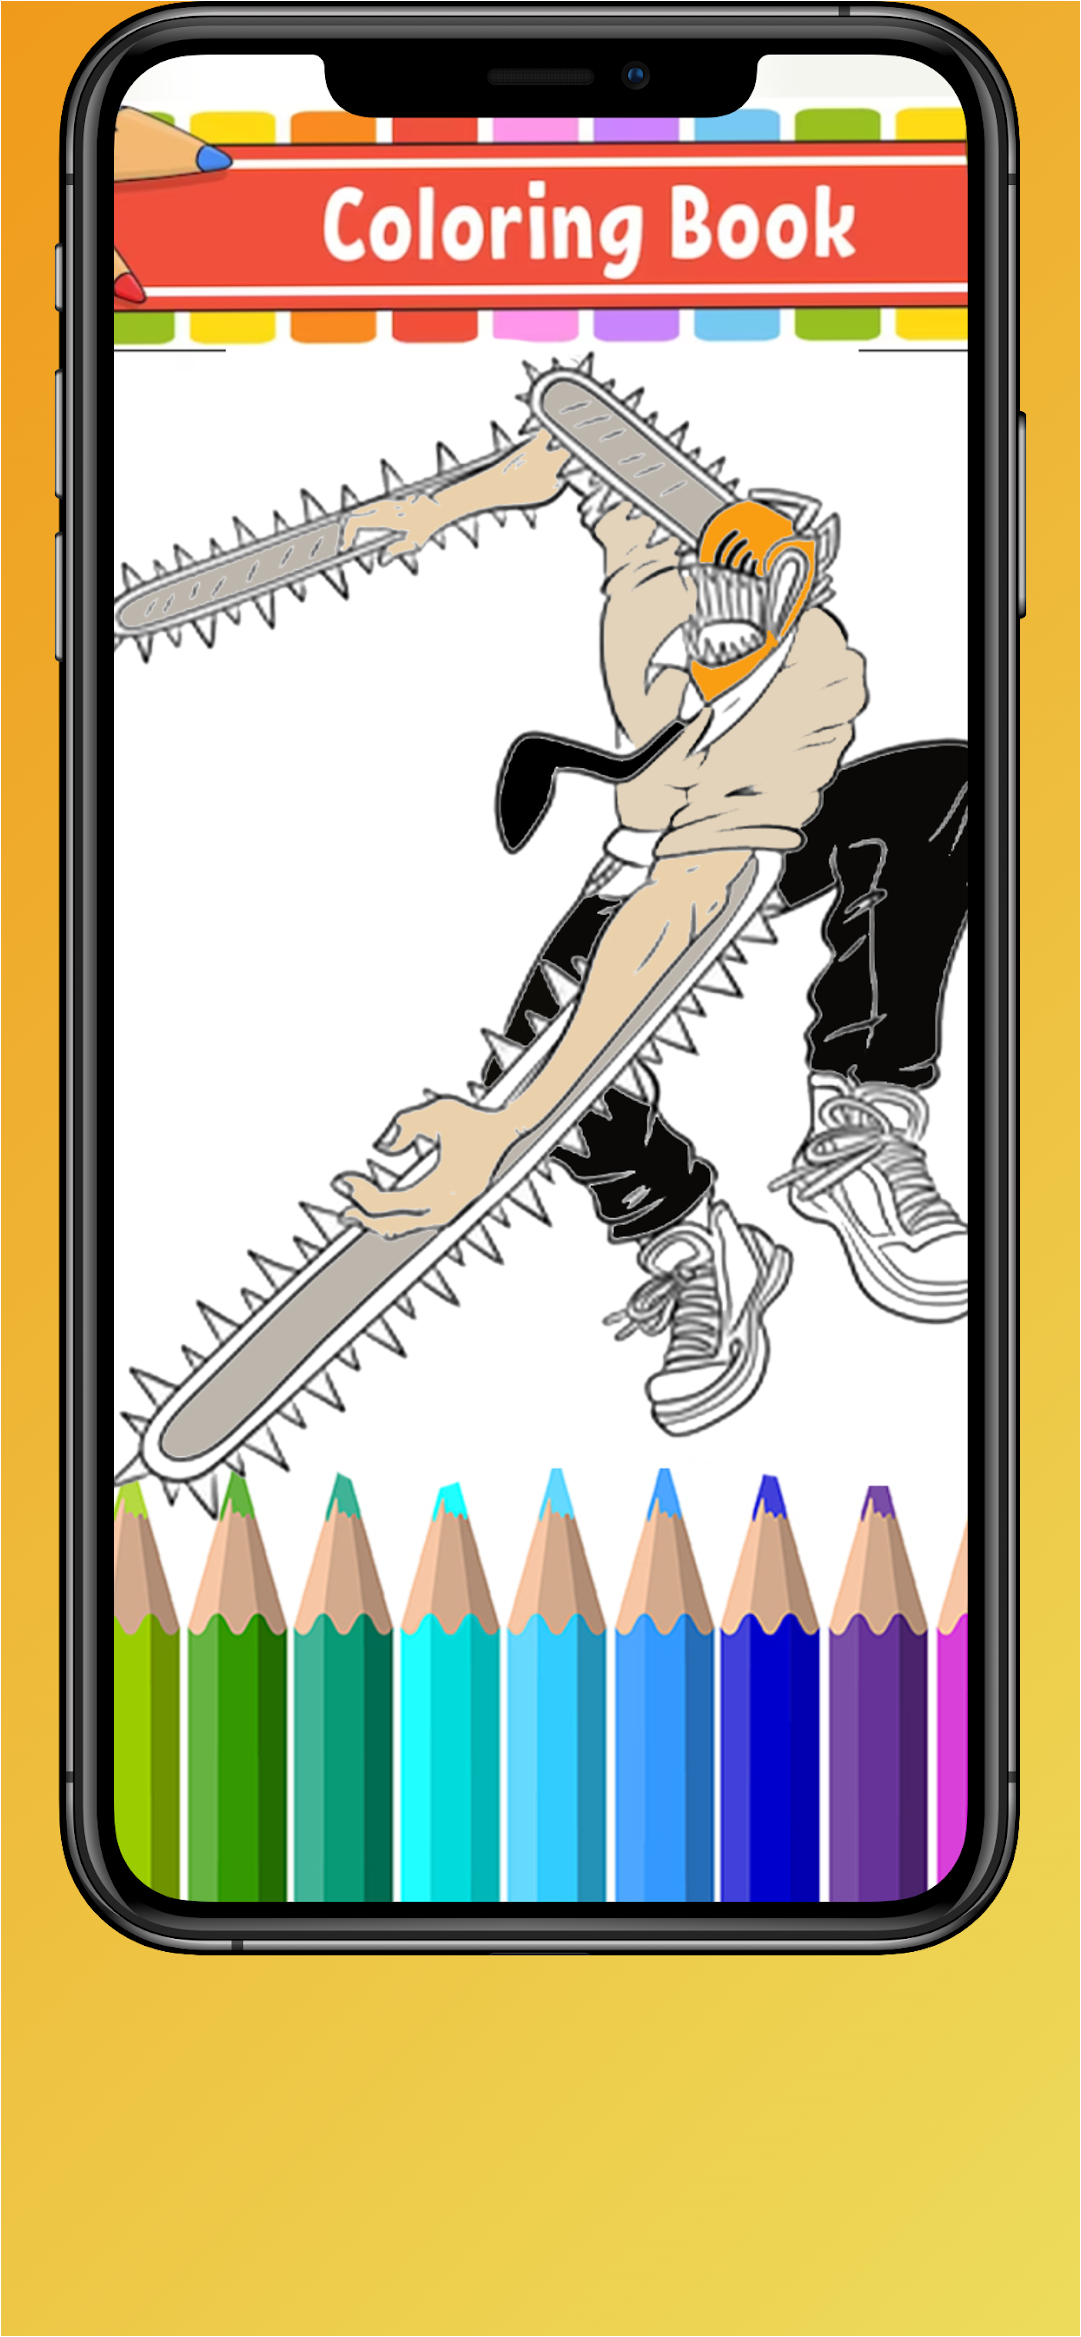 Chainsaw Man Coloring Pages 2 - Apps on Google Play